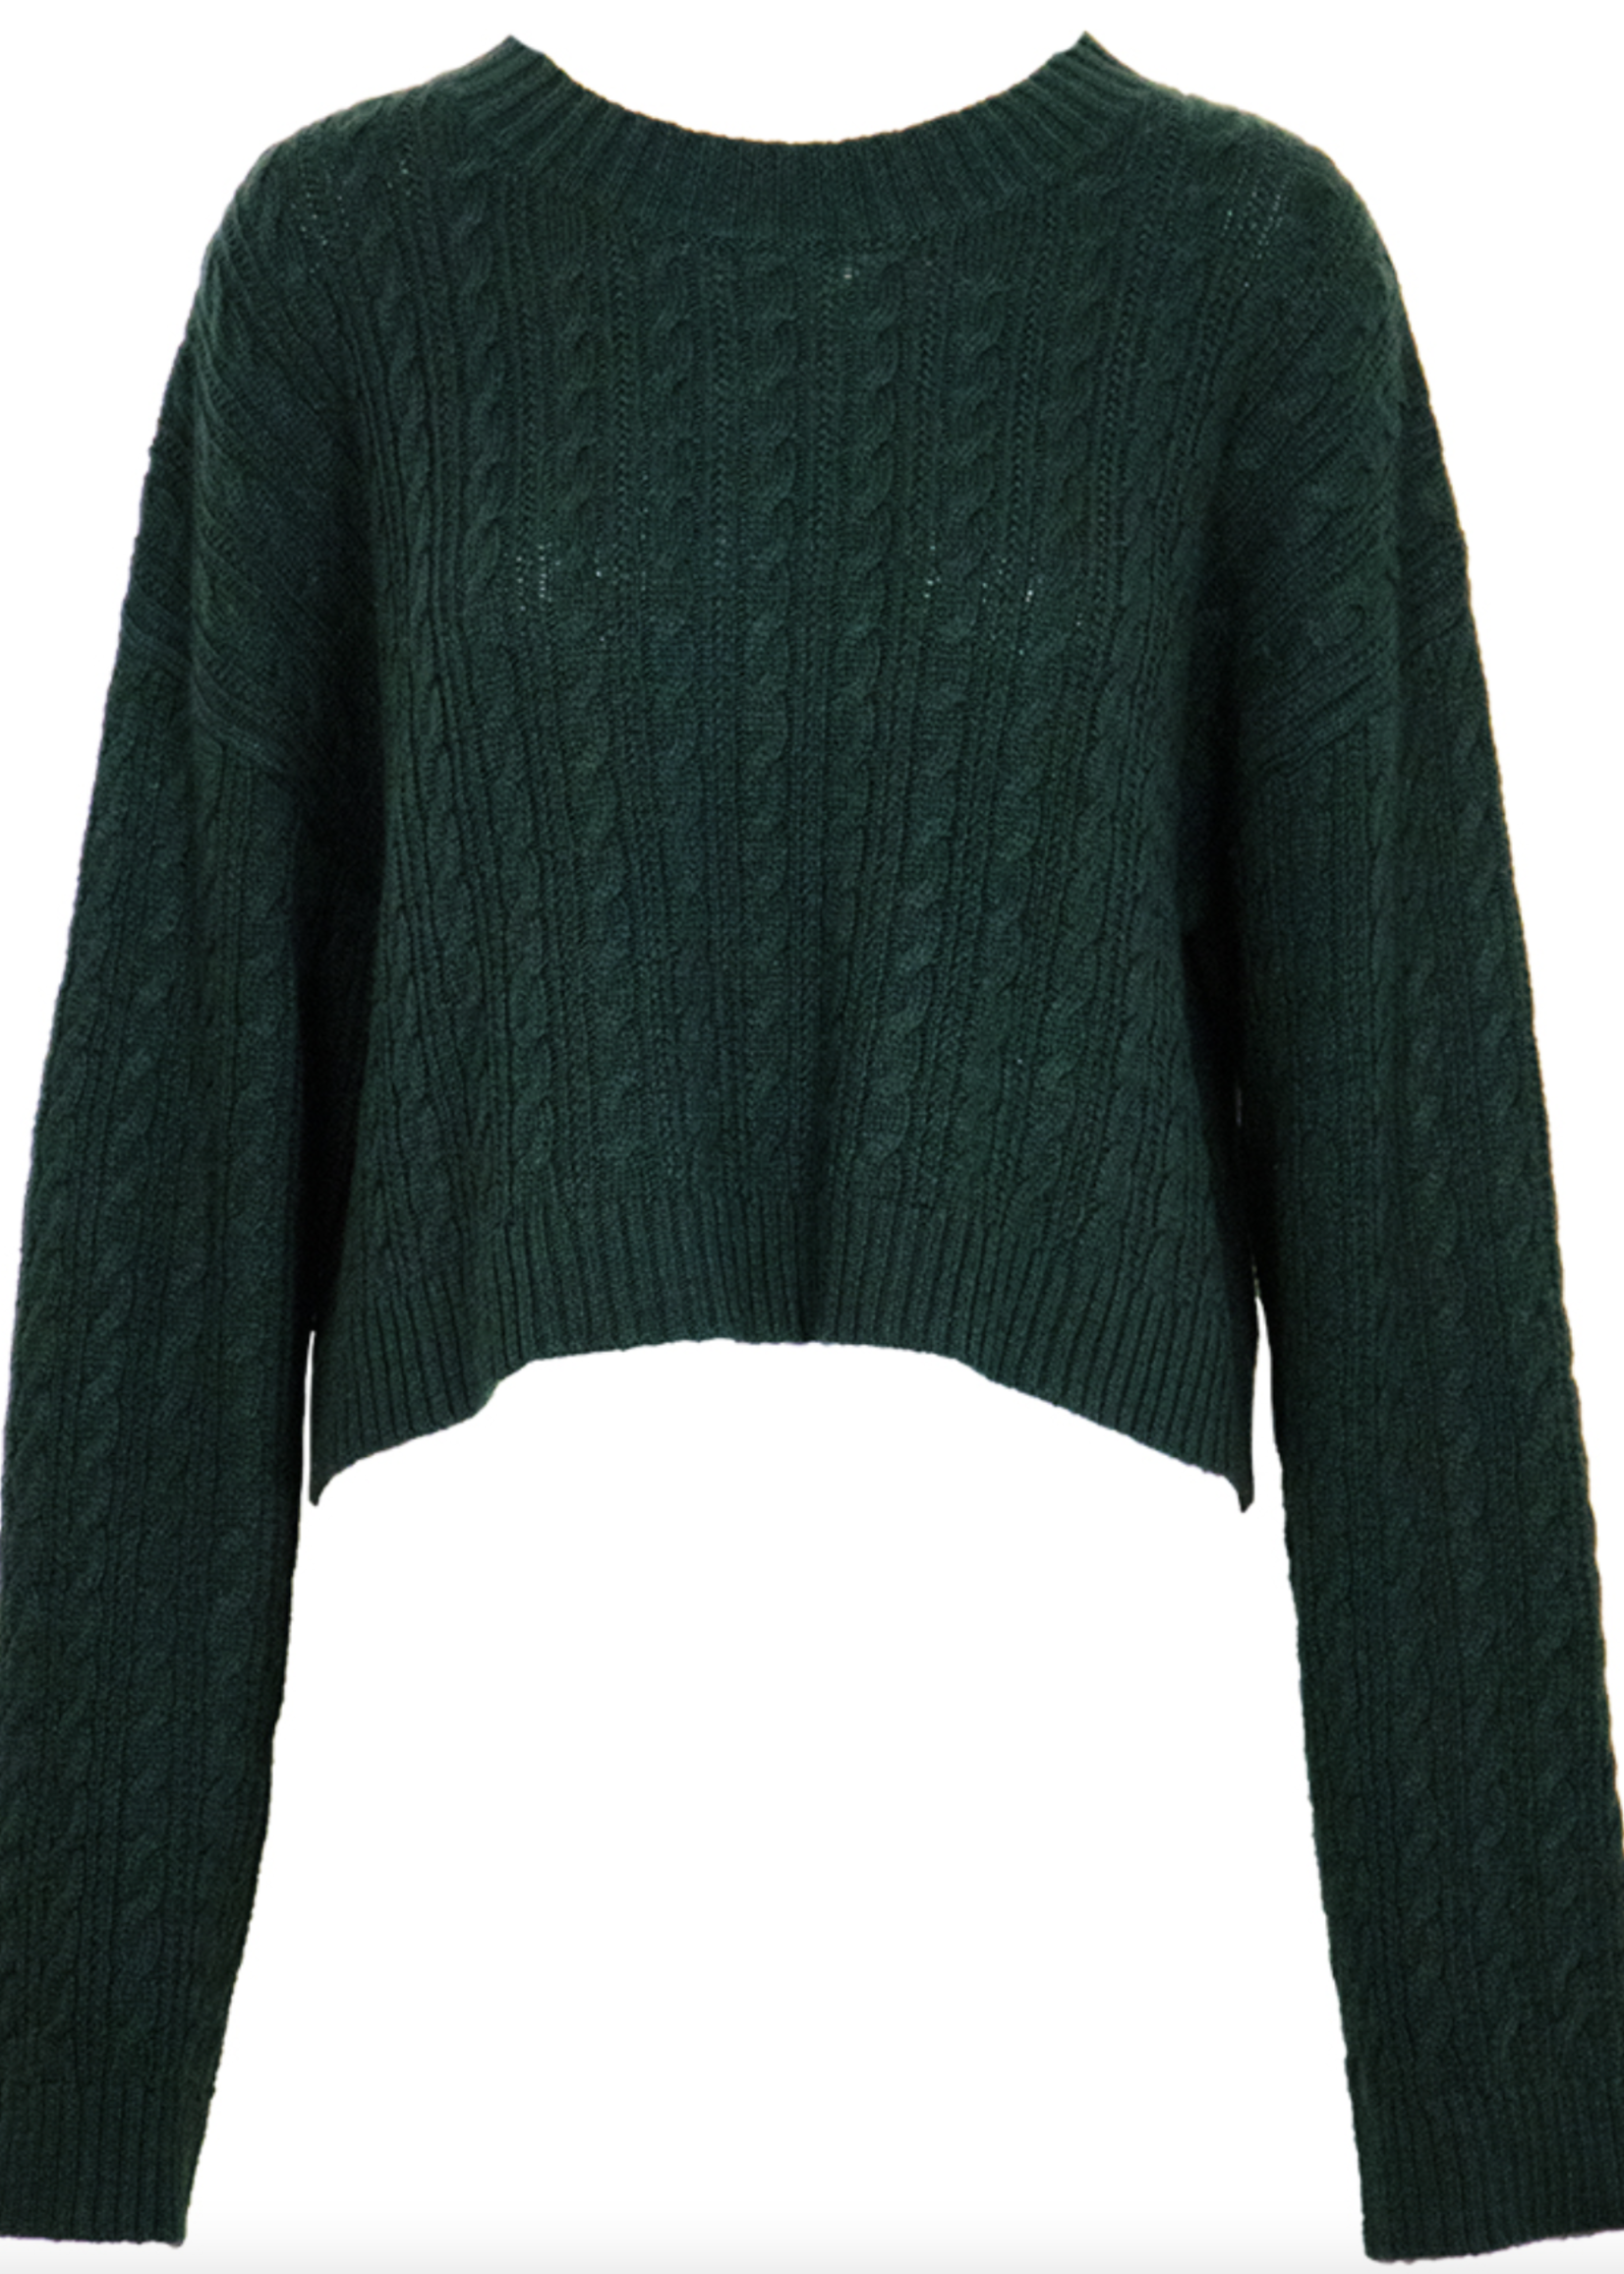 LUCY PARIS- SHAY CABLE KNIT SWEATER